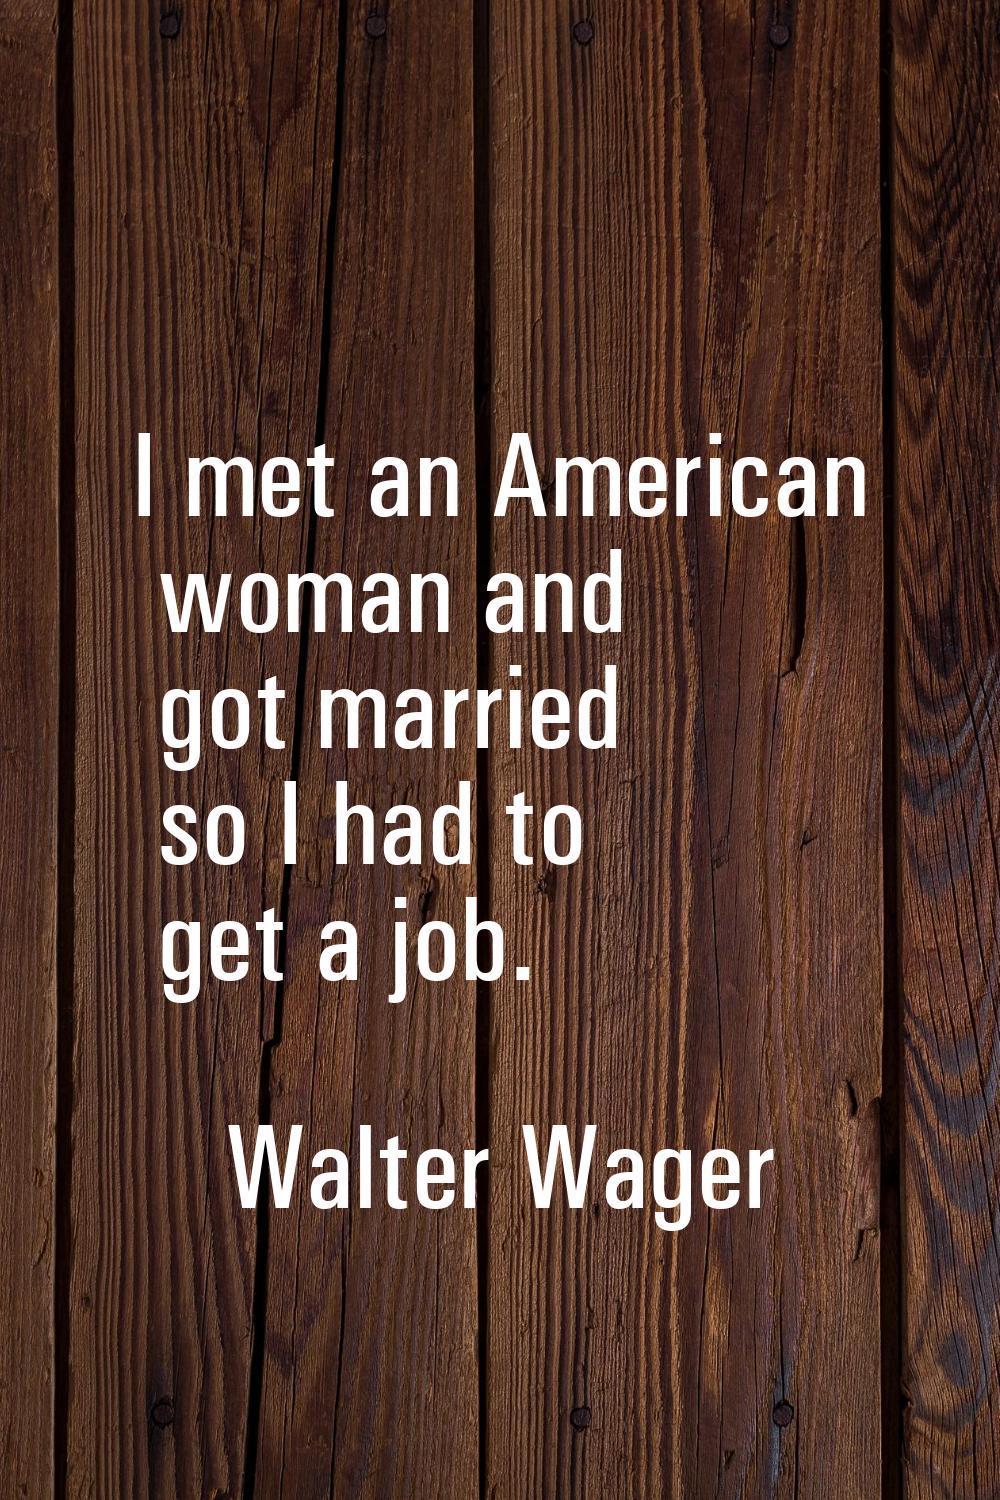 I met an American woman and got married so I had to get a job.